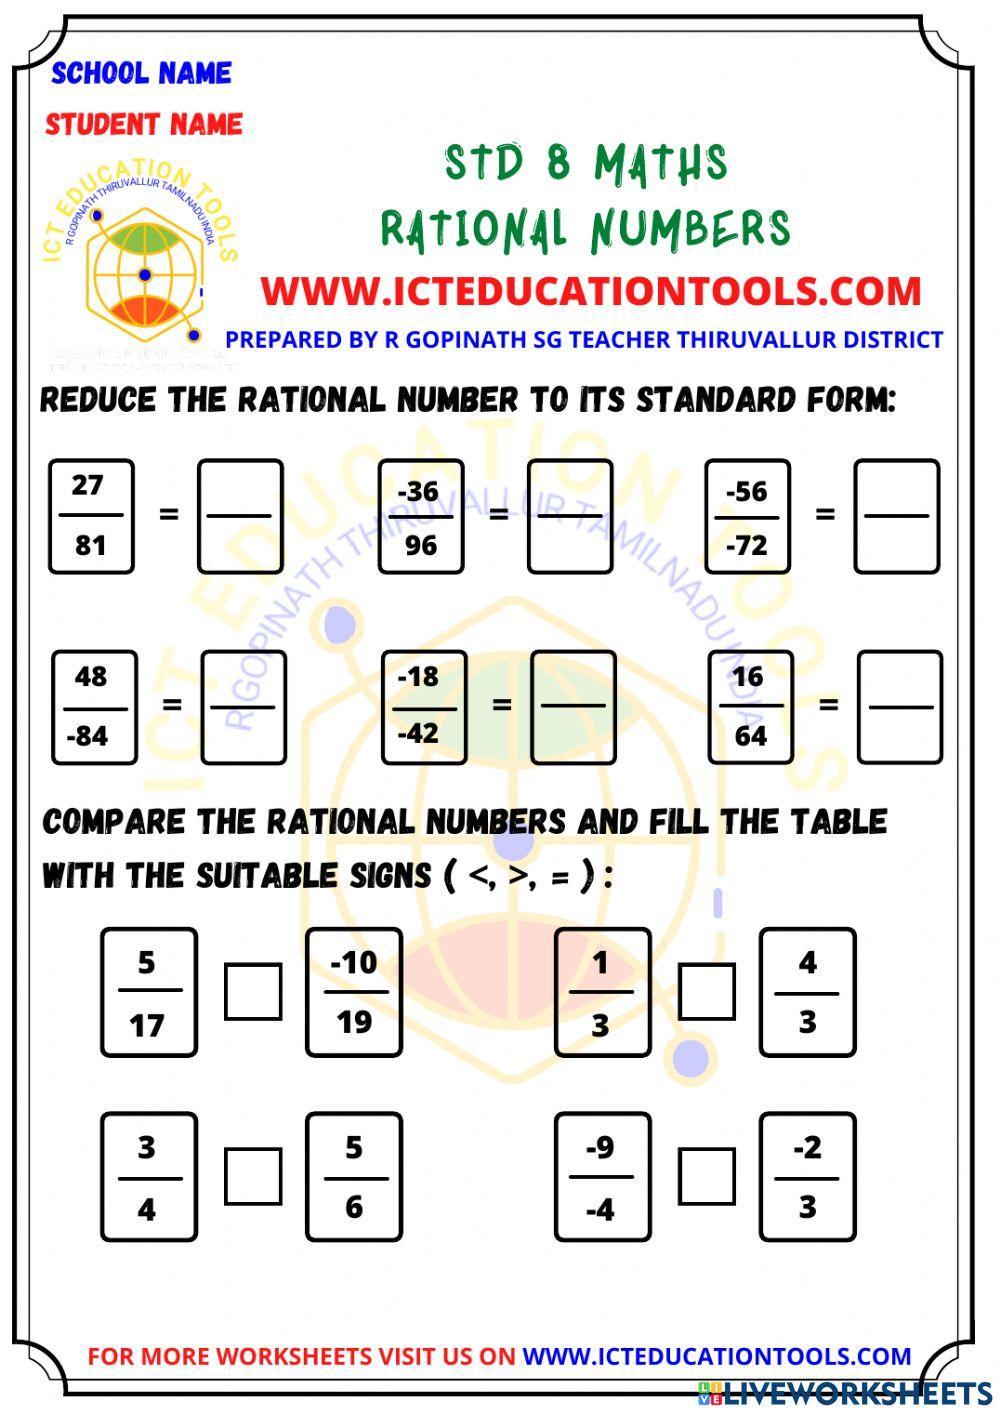 Std 8 maths rational numbers english med